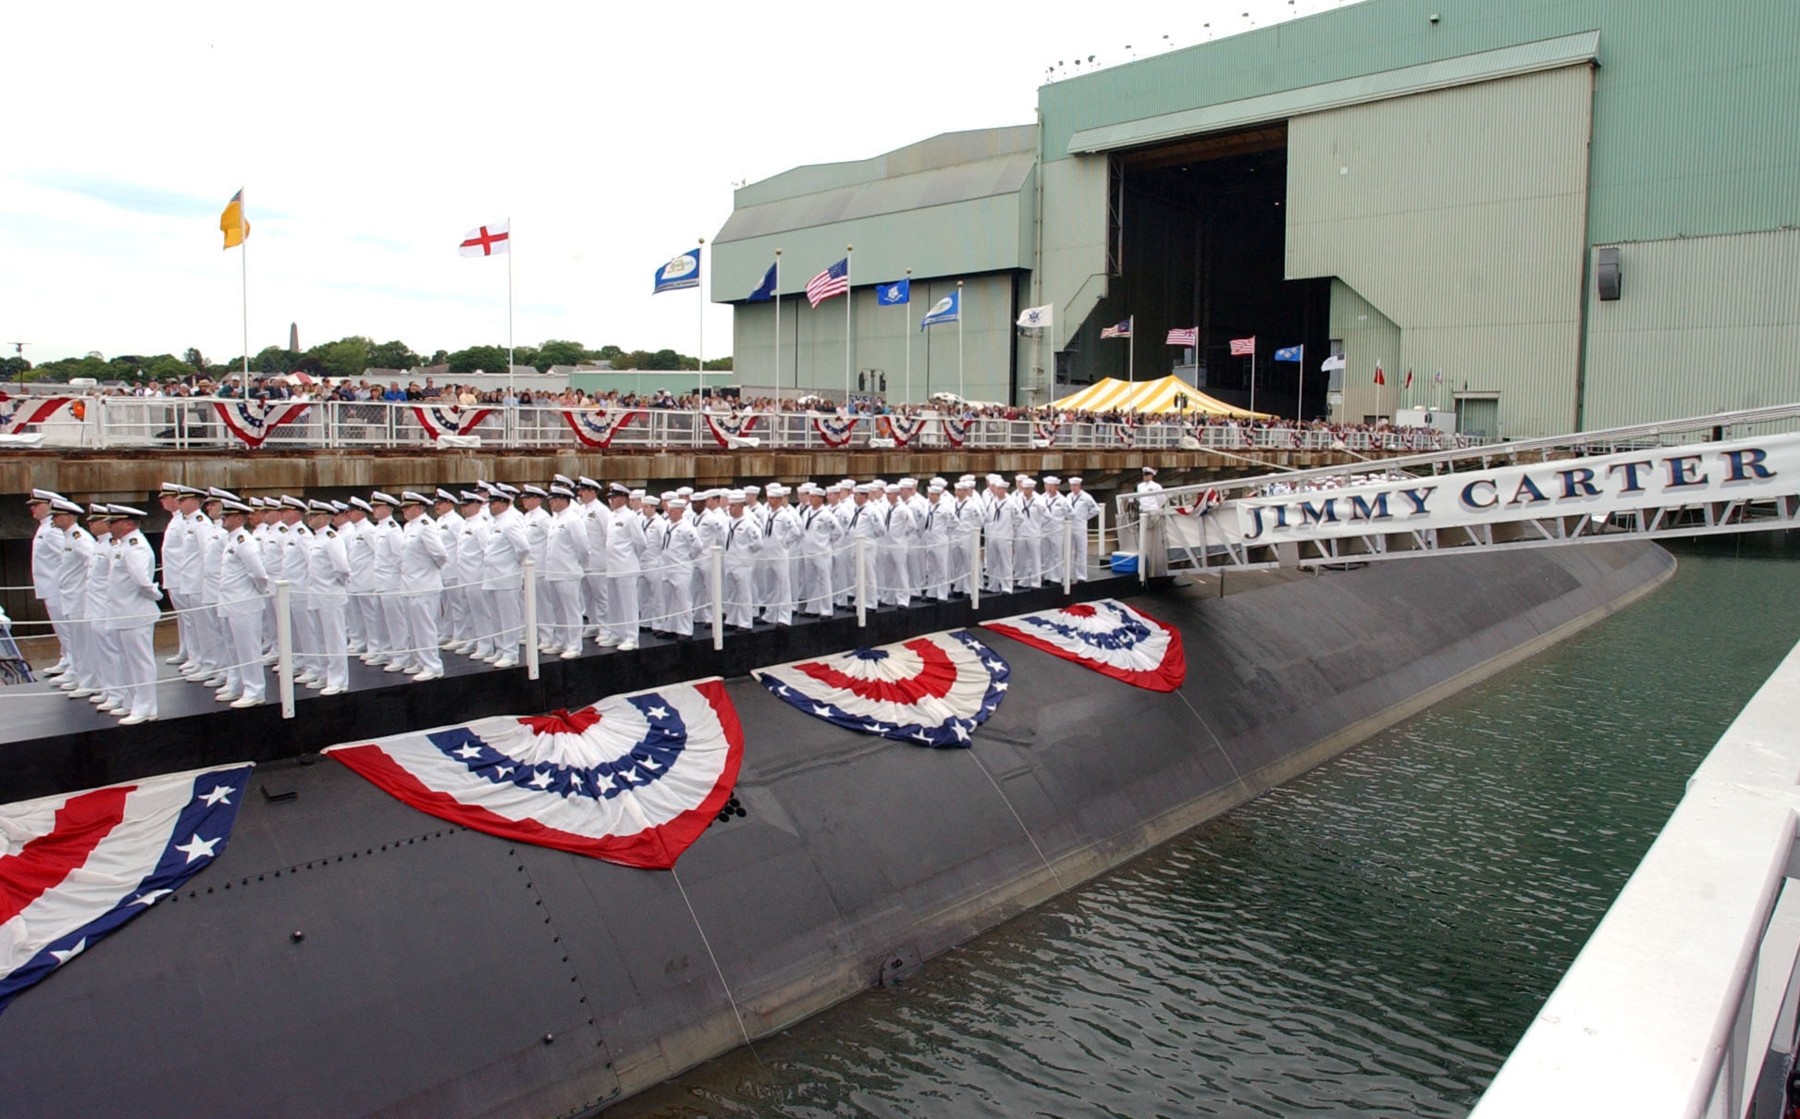 ssn-23 uss jimmy carter seawolf class attack submarine us navy christening general dynamics electric boat groton 08